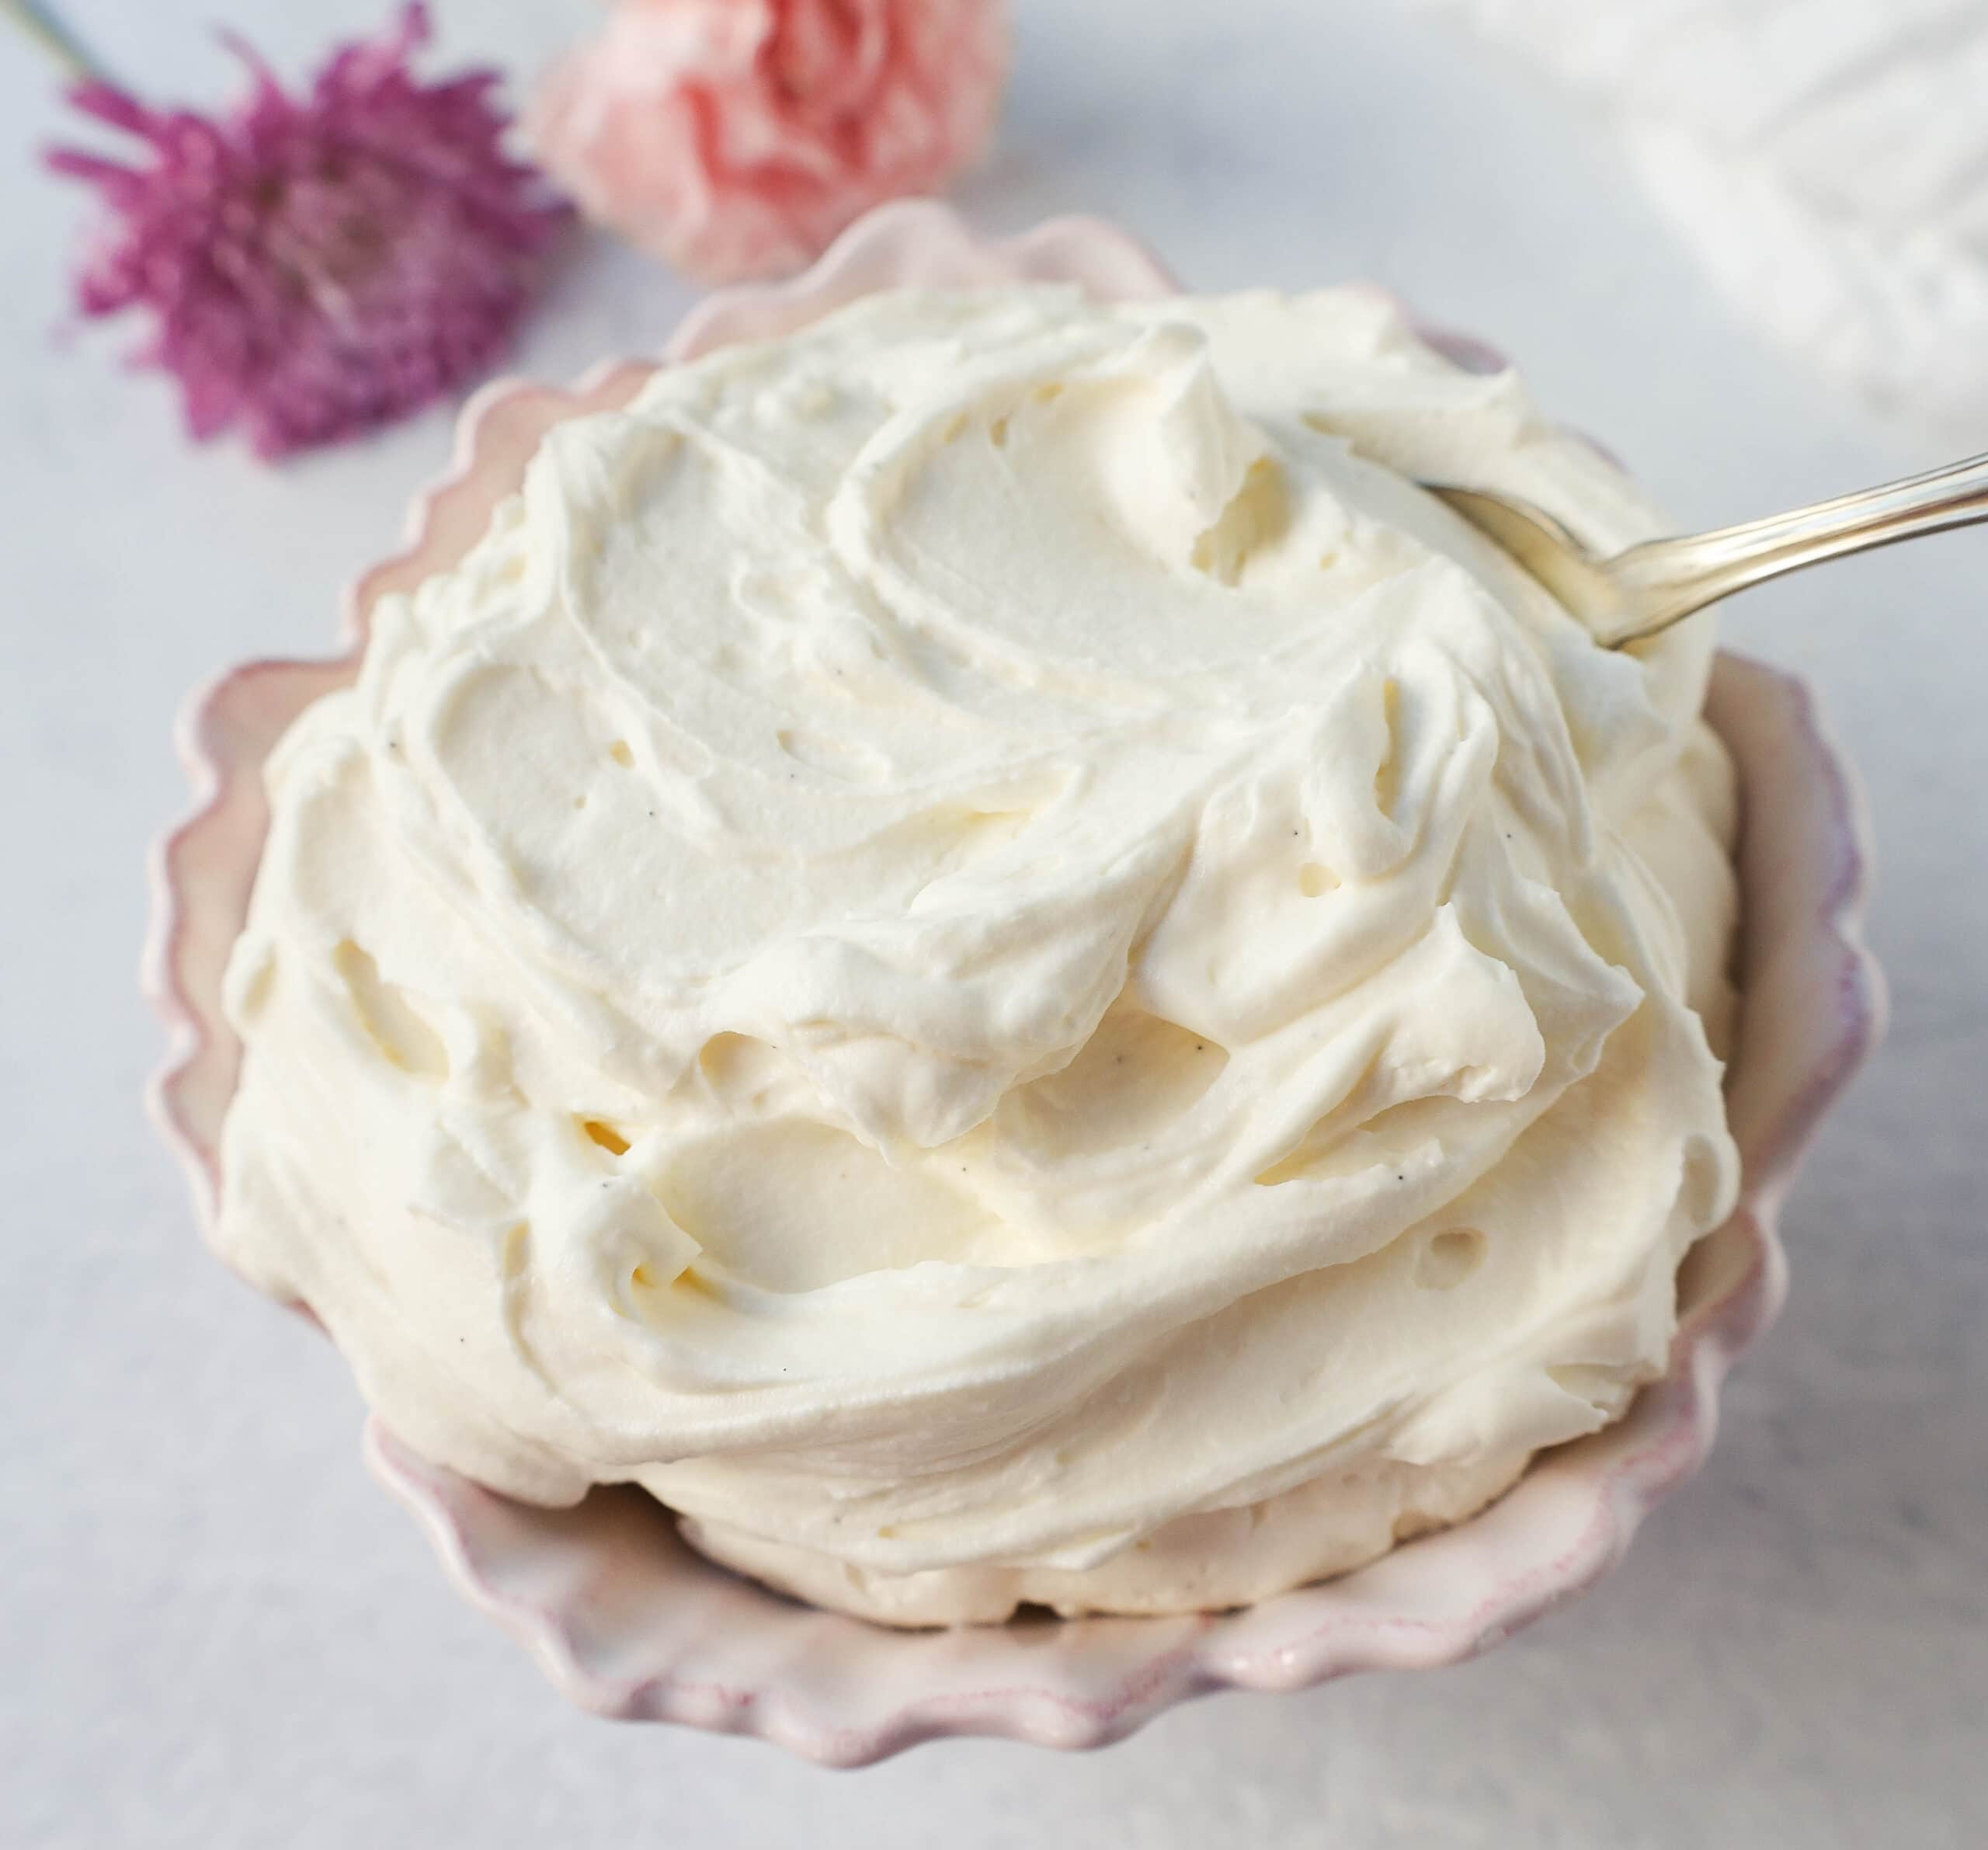 Creamy mascarpone cream is the most delicious and luxurious cake filling, dessert filling, or the perfect spread on any dessert. It is made with heavy cream, mascarpone cheese, powdered sugar, and vanilla or almond extract.